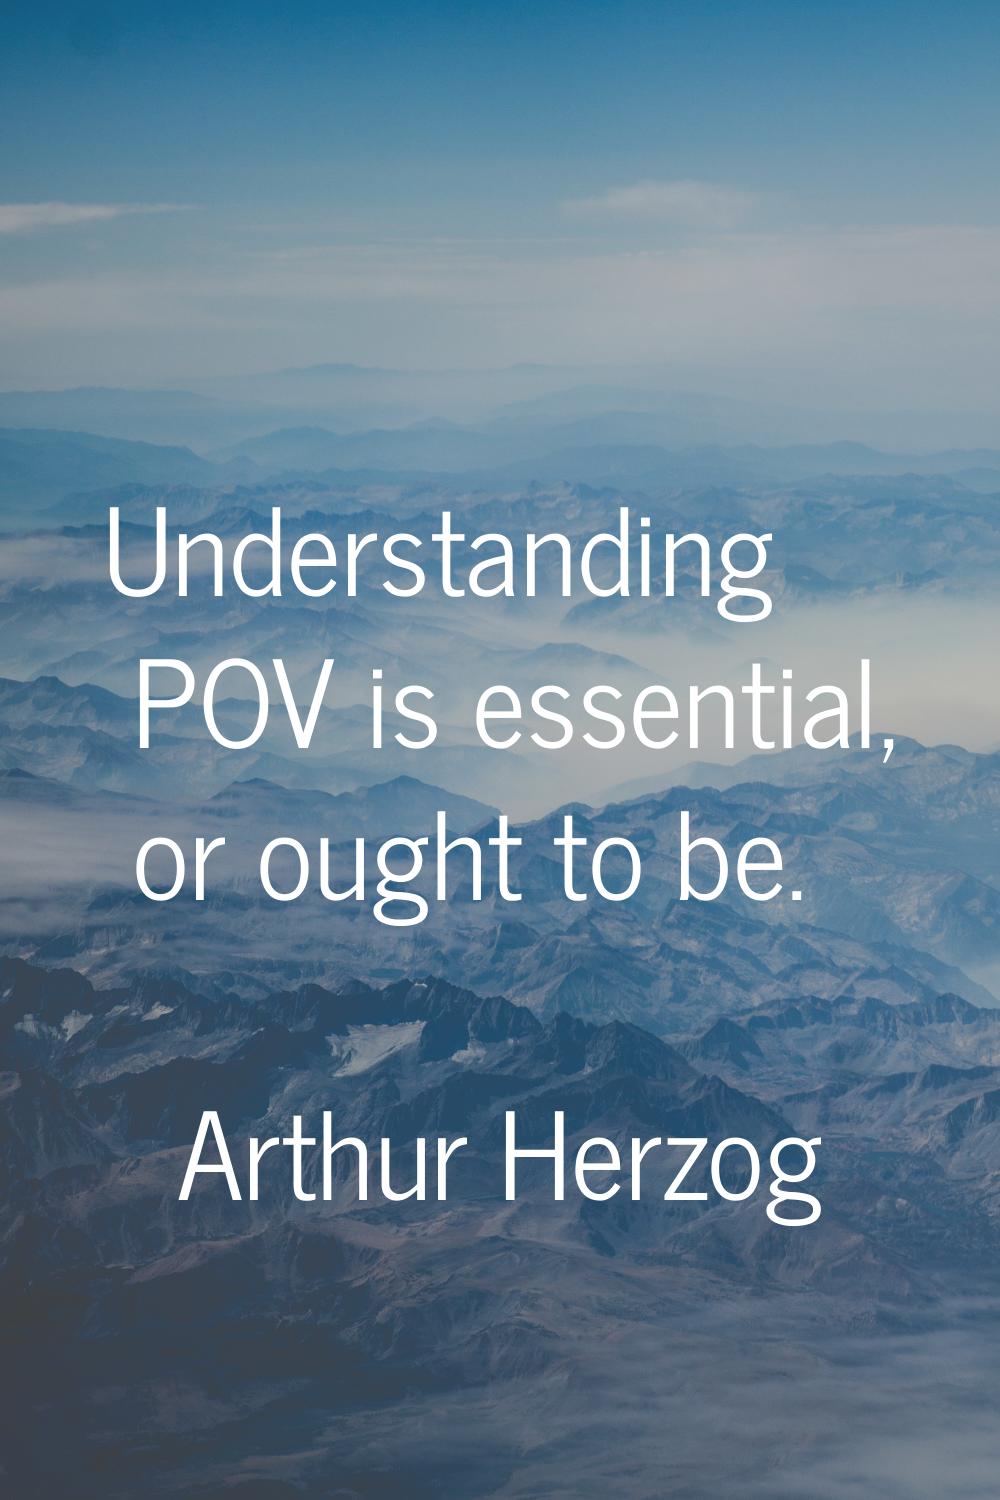 Understanding POV is essential, or ought to be.